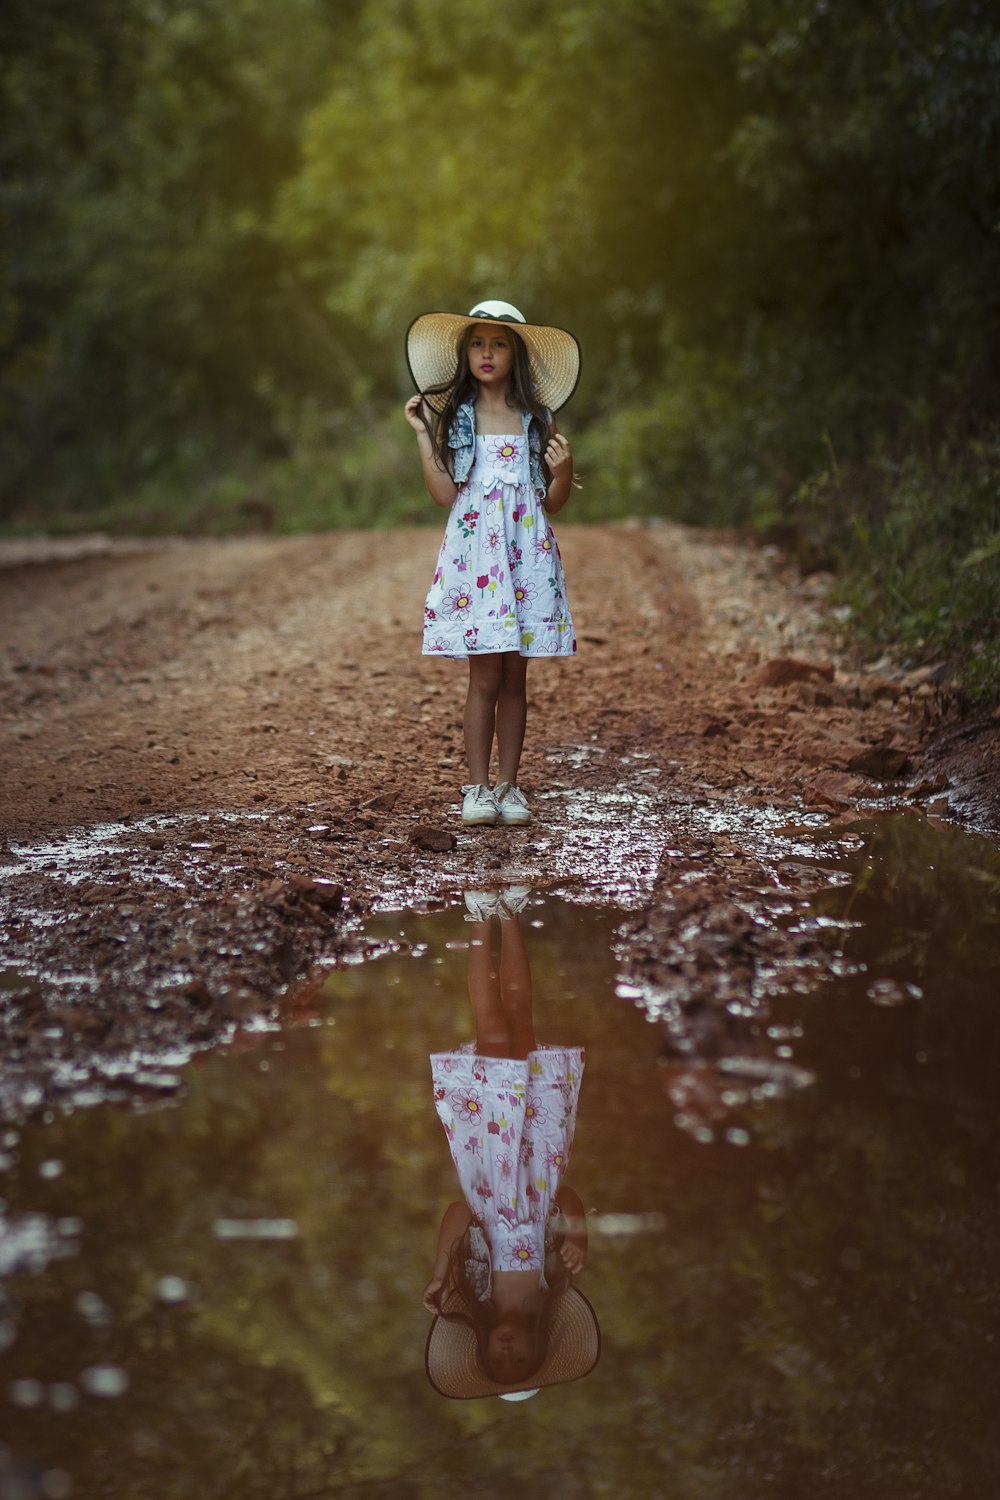 27+ Little Girl Pictures | Download Free Images on Unsplash